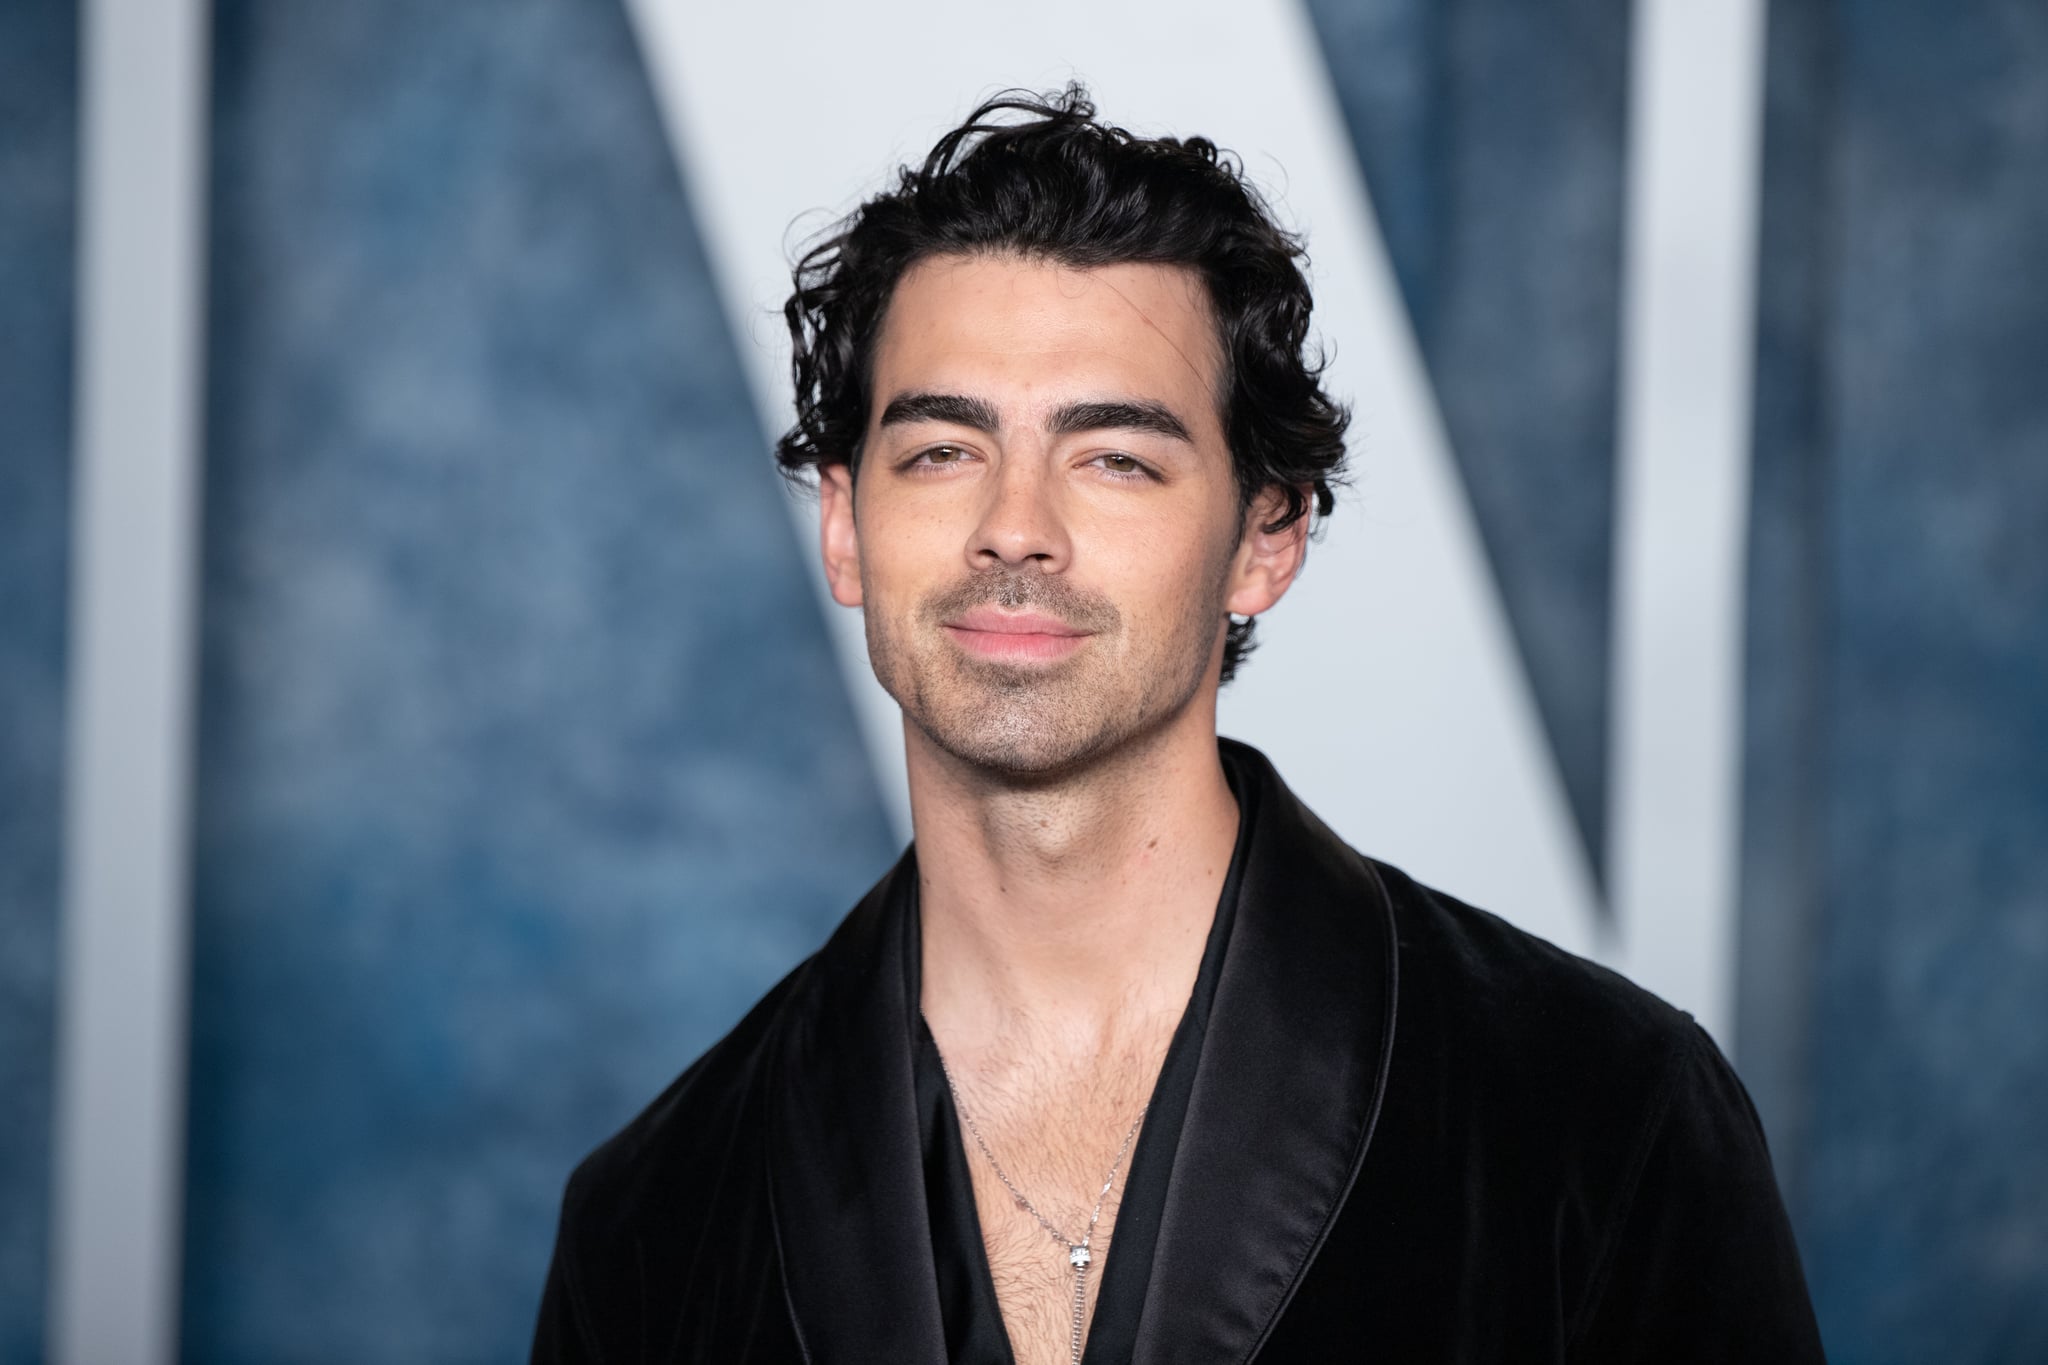 BEVERLY HILLS, CALIFORNIA - MARCH 12: Joe Jonas attends the 2023 Vanity Fair Oscar Party hosted by Radhika Jones at Wallis Annenberg Centre for the Performing Arts on March 12, 2023 in Beverly Hills, California. (Photo by Robert Smith/Patrick McMullan via Getty Images)